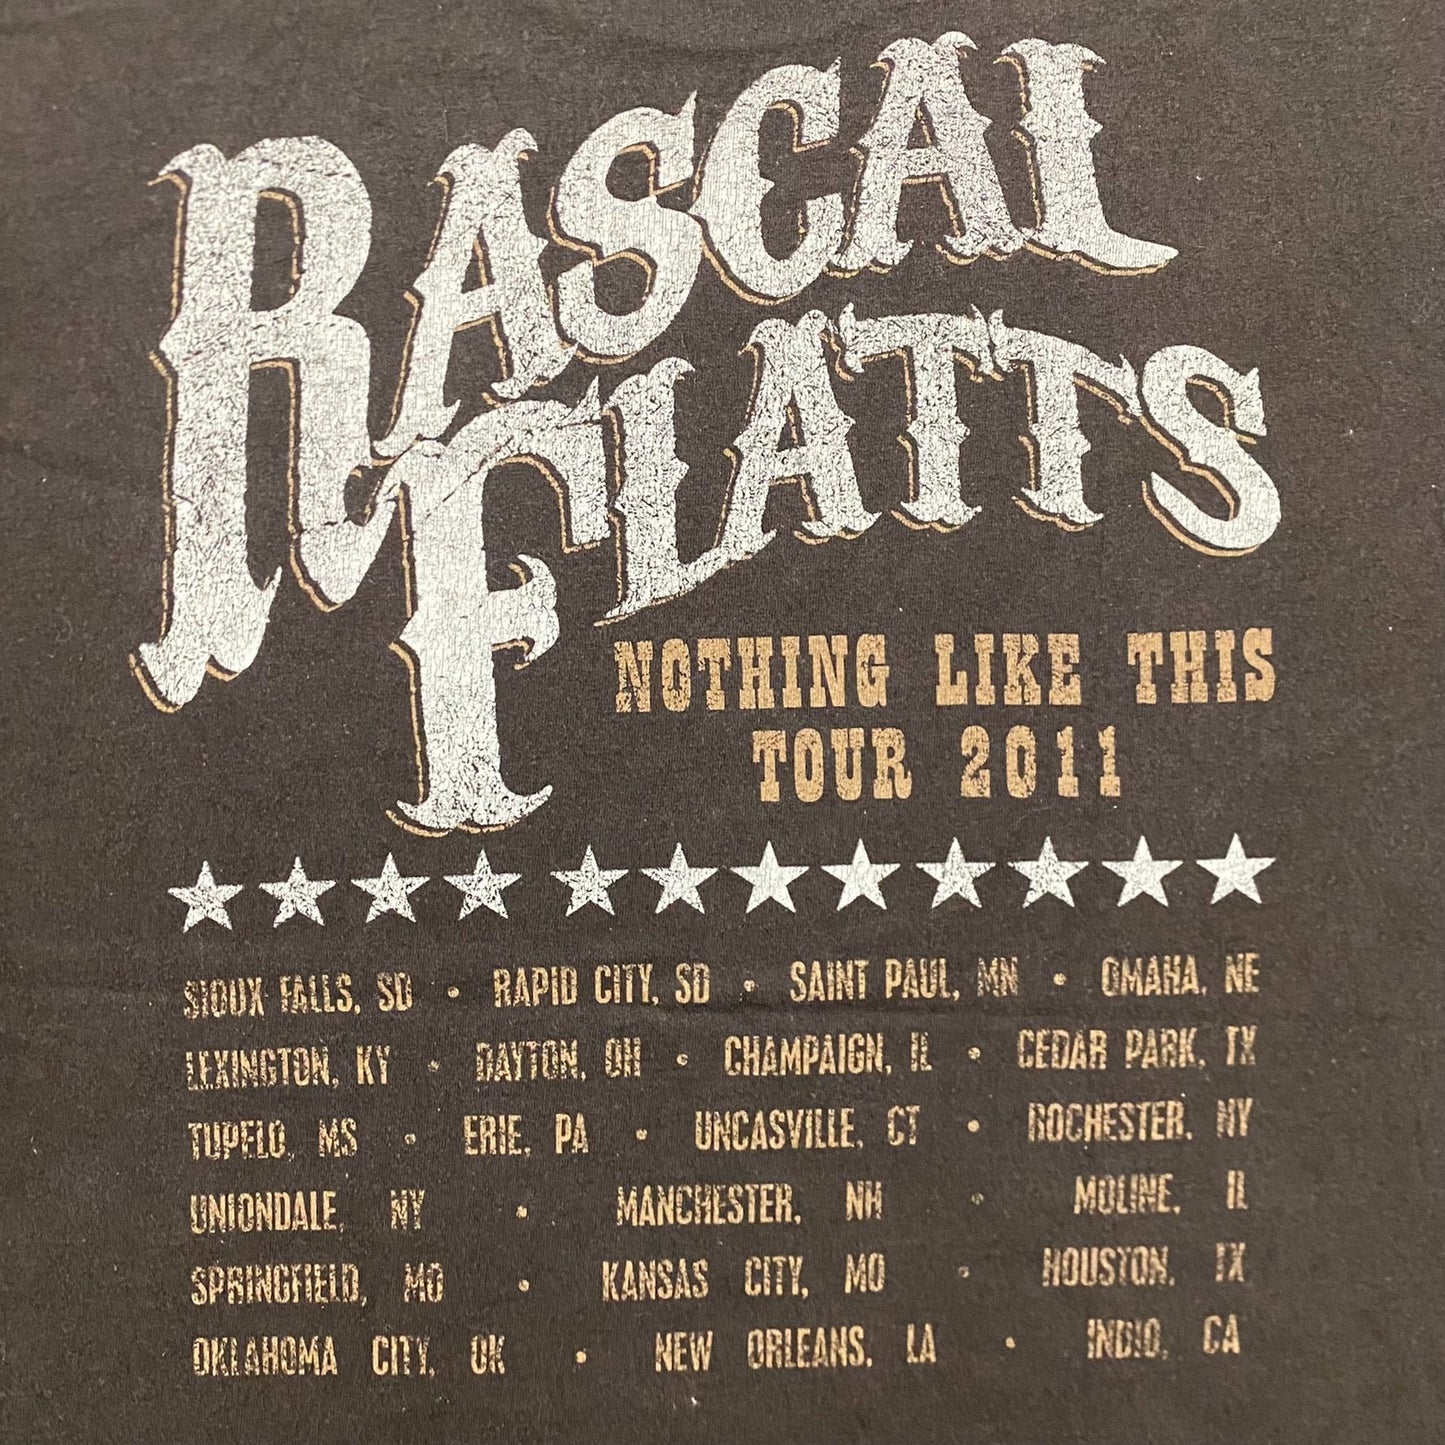 Vintage Y2K Rascal Flatts Tour Country Music Band Tee